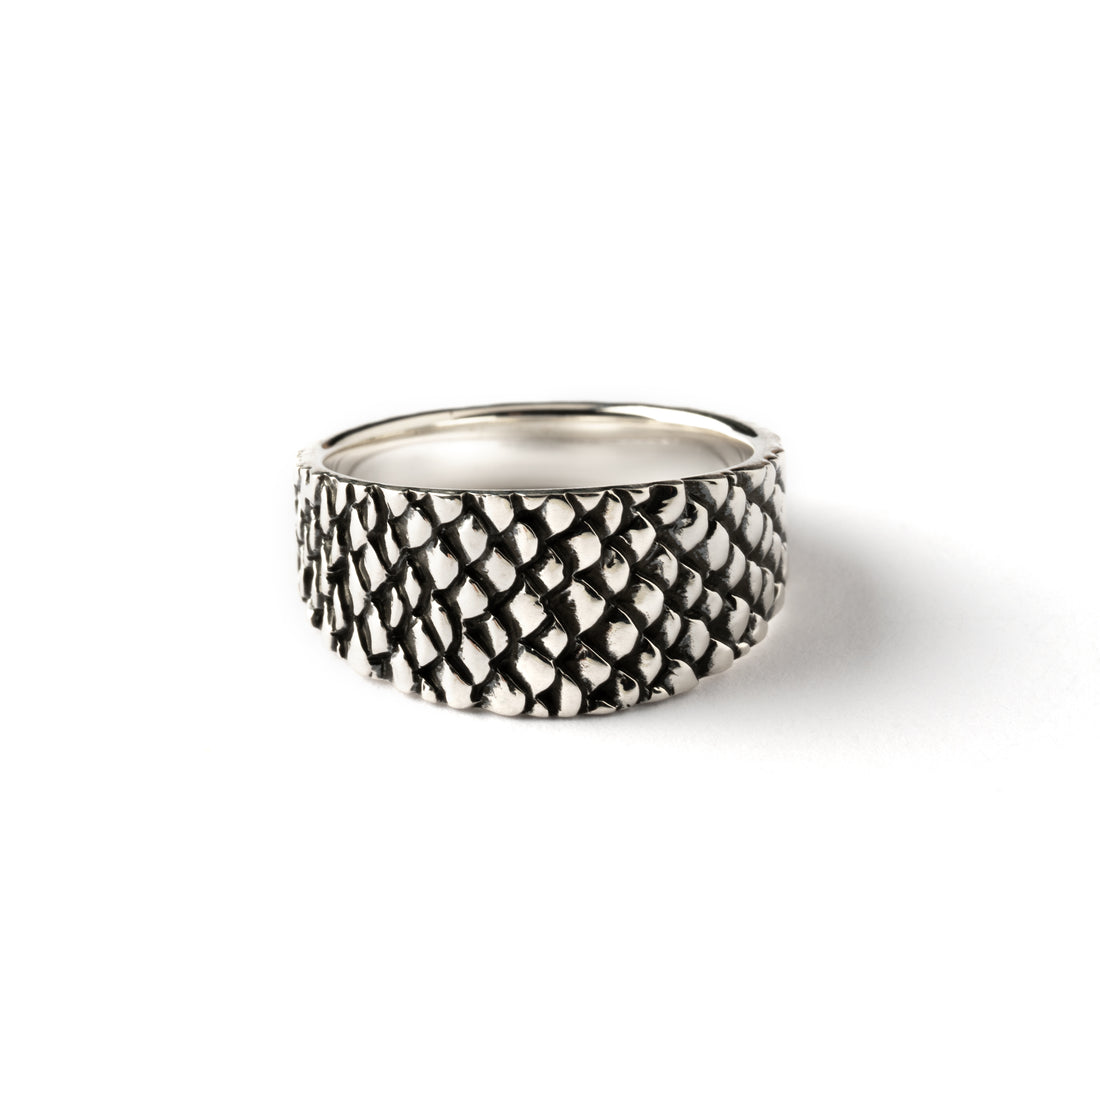 Dragon Scale Silver Ring frontal view